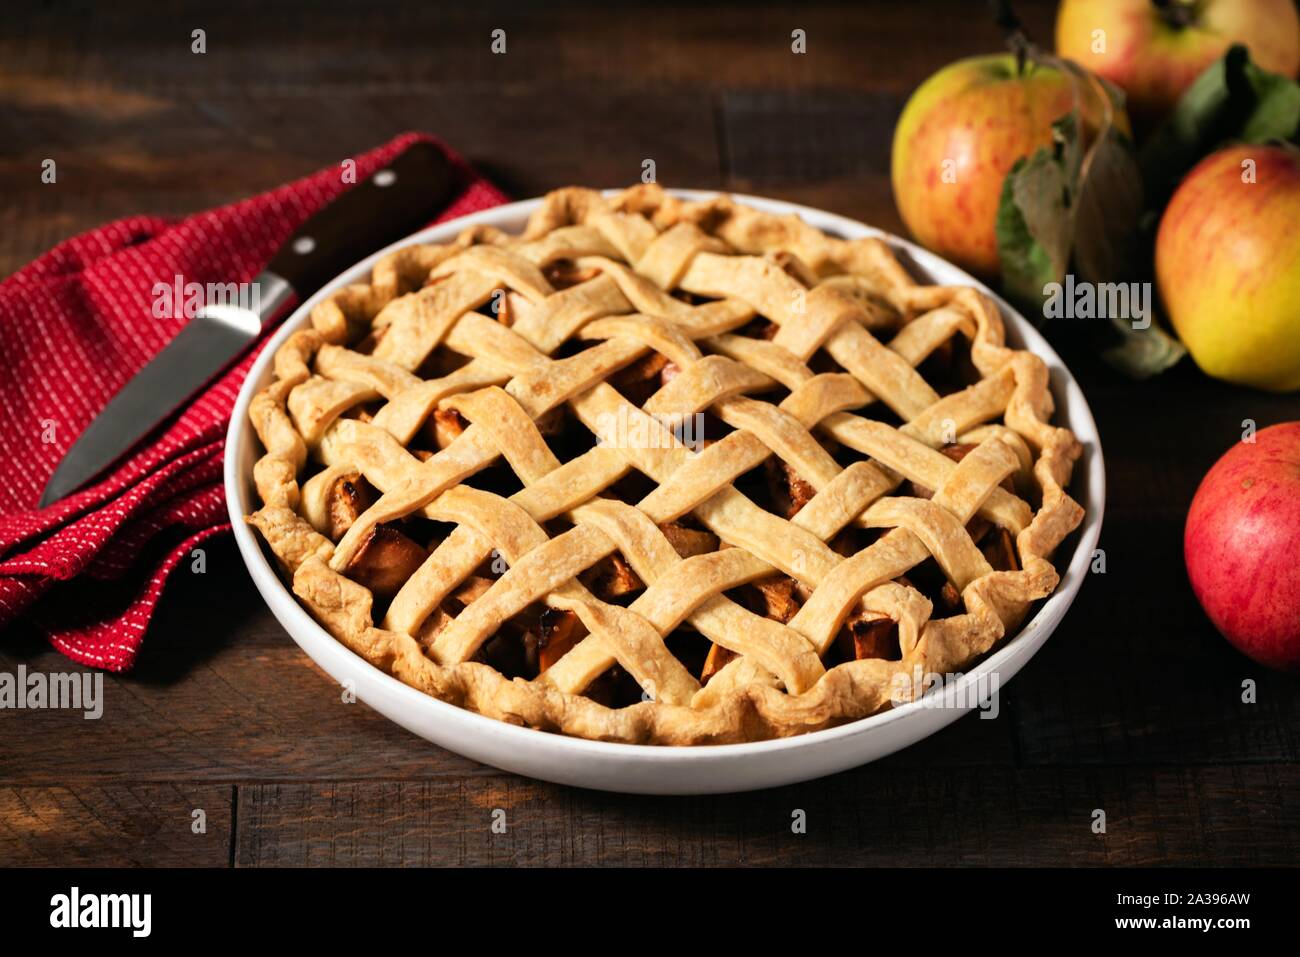 Homemade apple pie with lattice crust top on a rustic wooden table Stock Photo